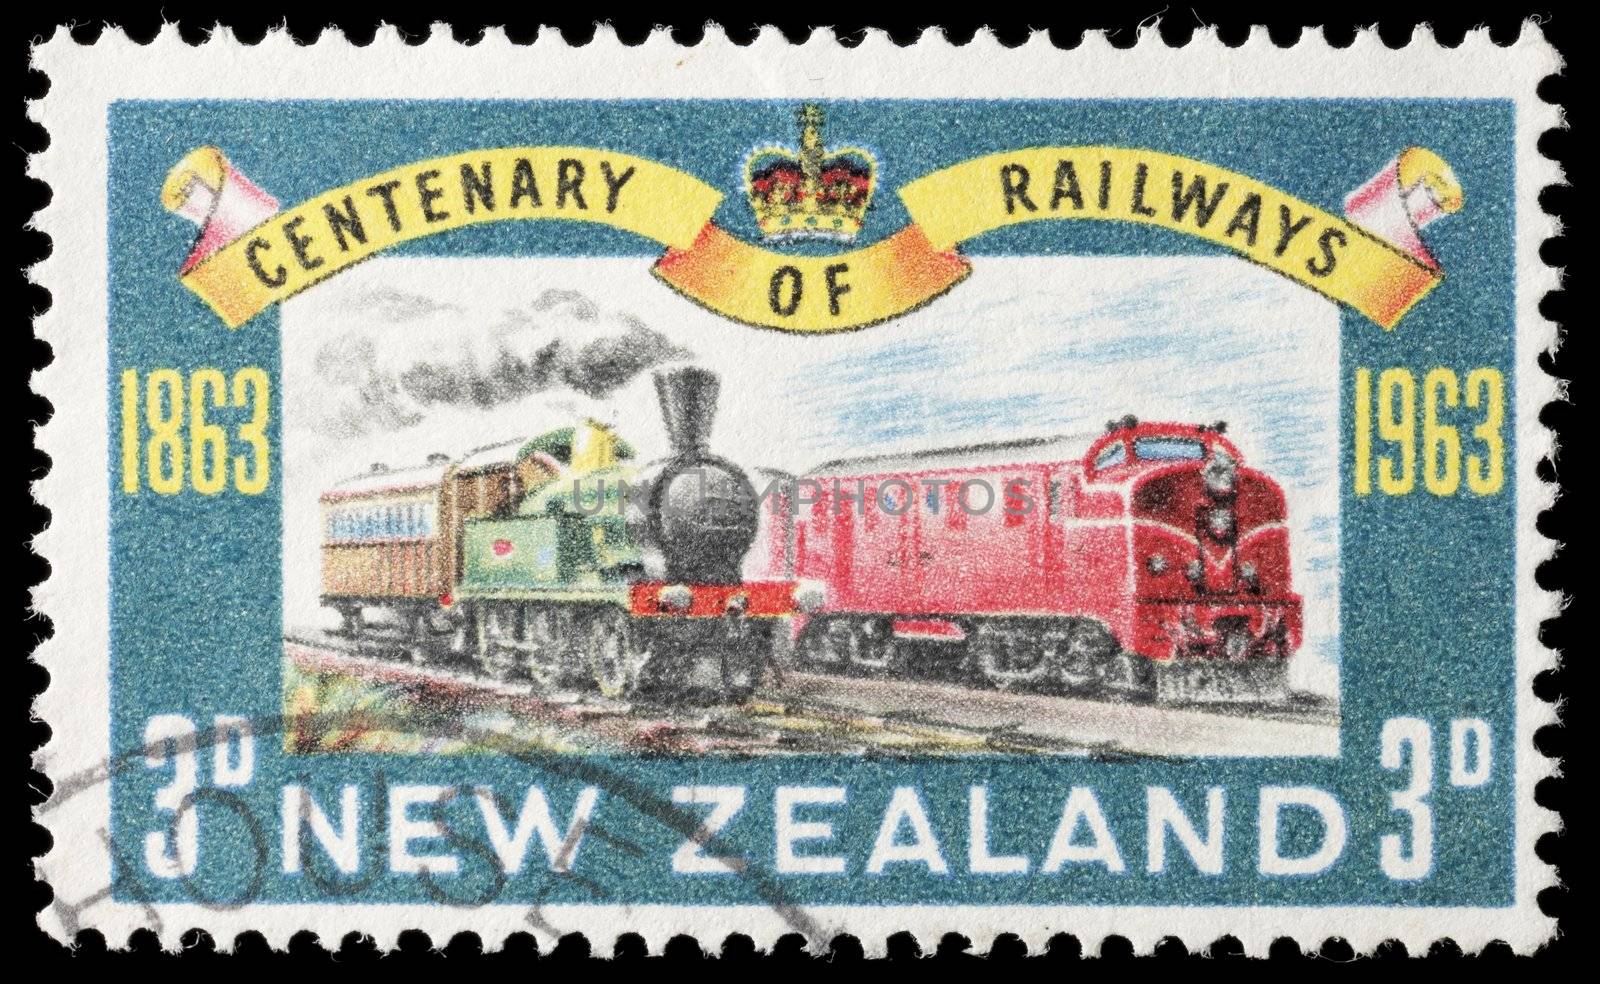 Railway of New Zealand by Stocksnapper